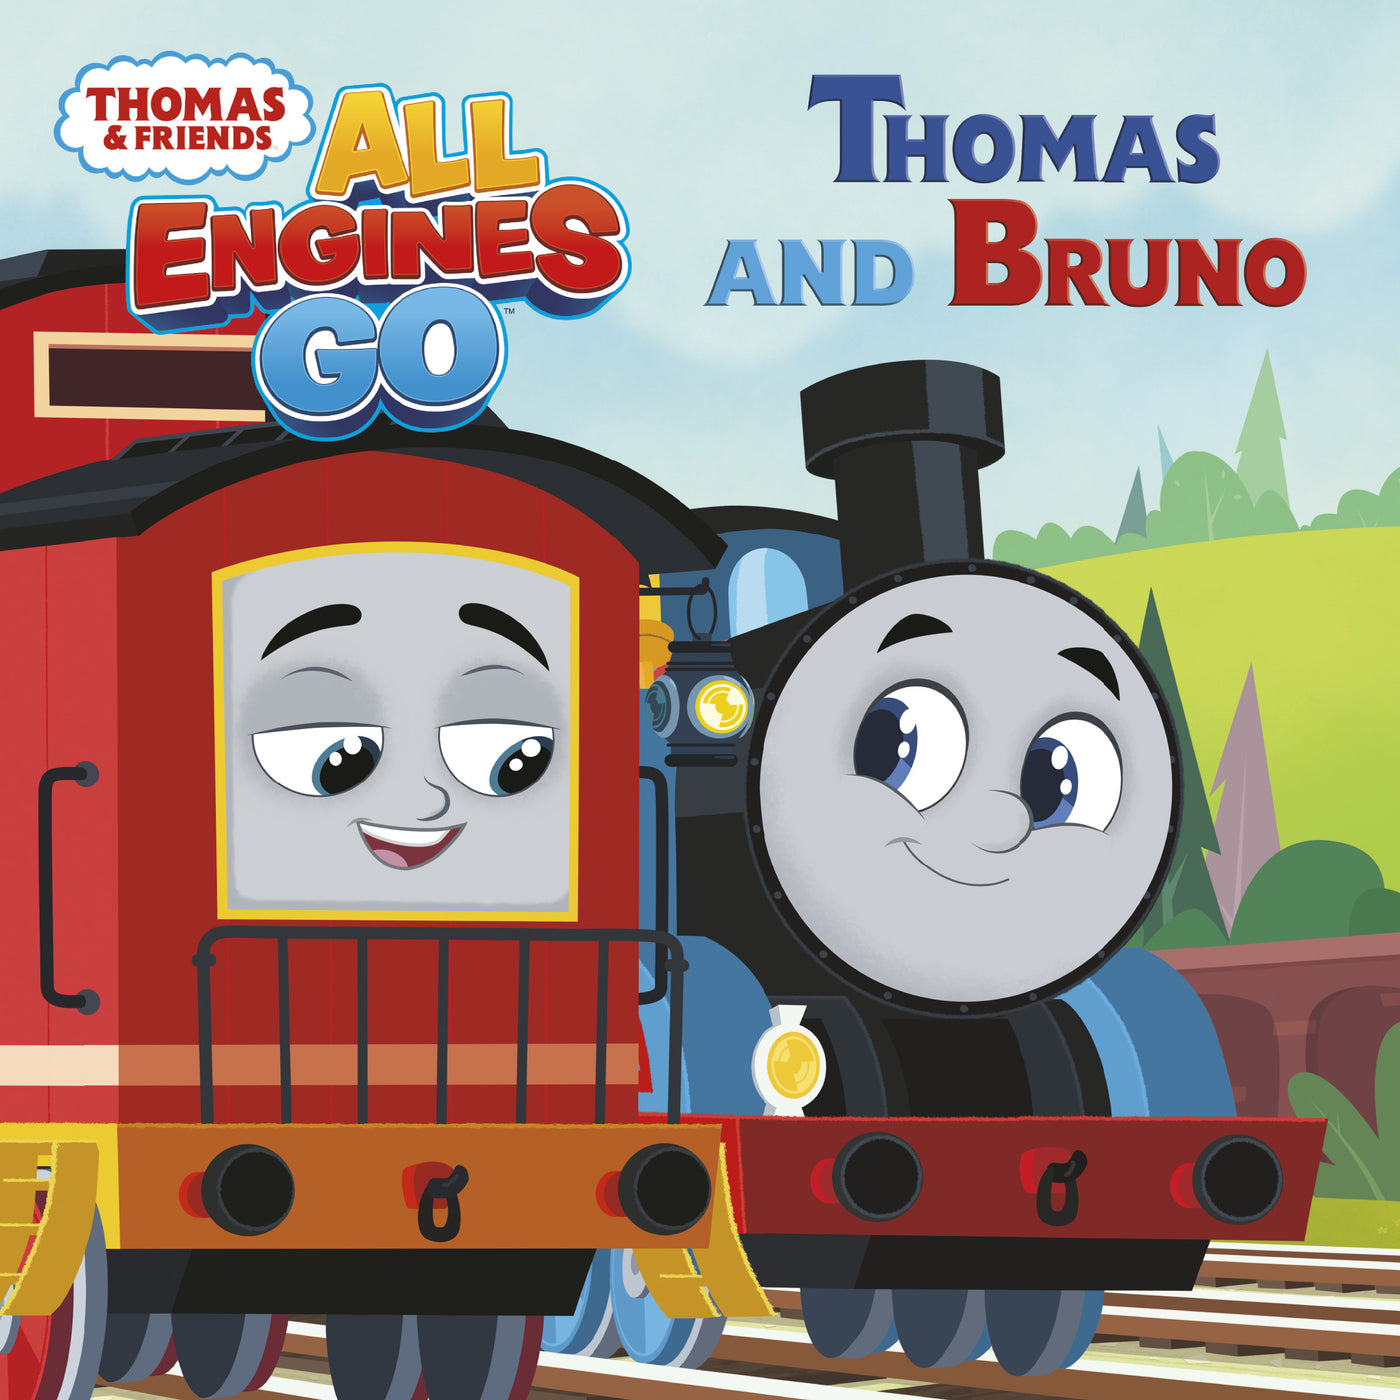 Thomas and Bruno (Thomas &amp; Friends: All Engines Go)